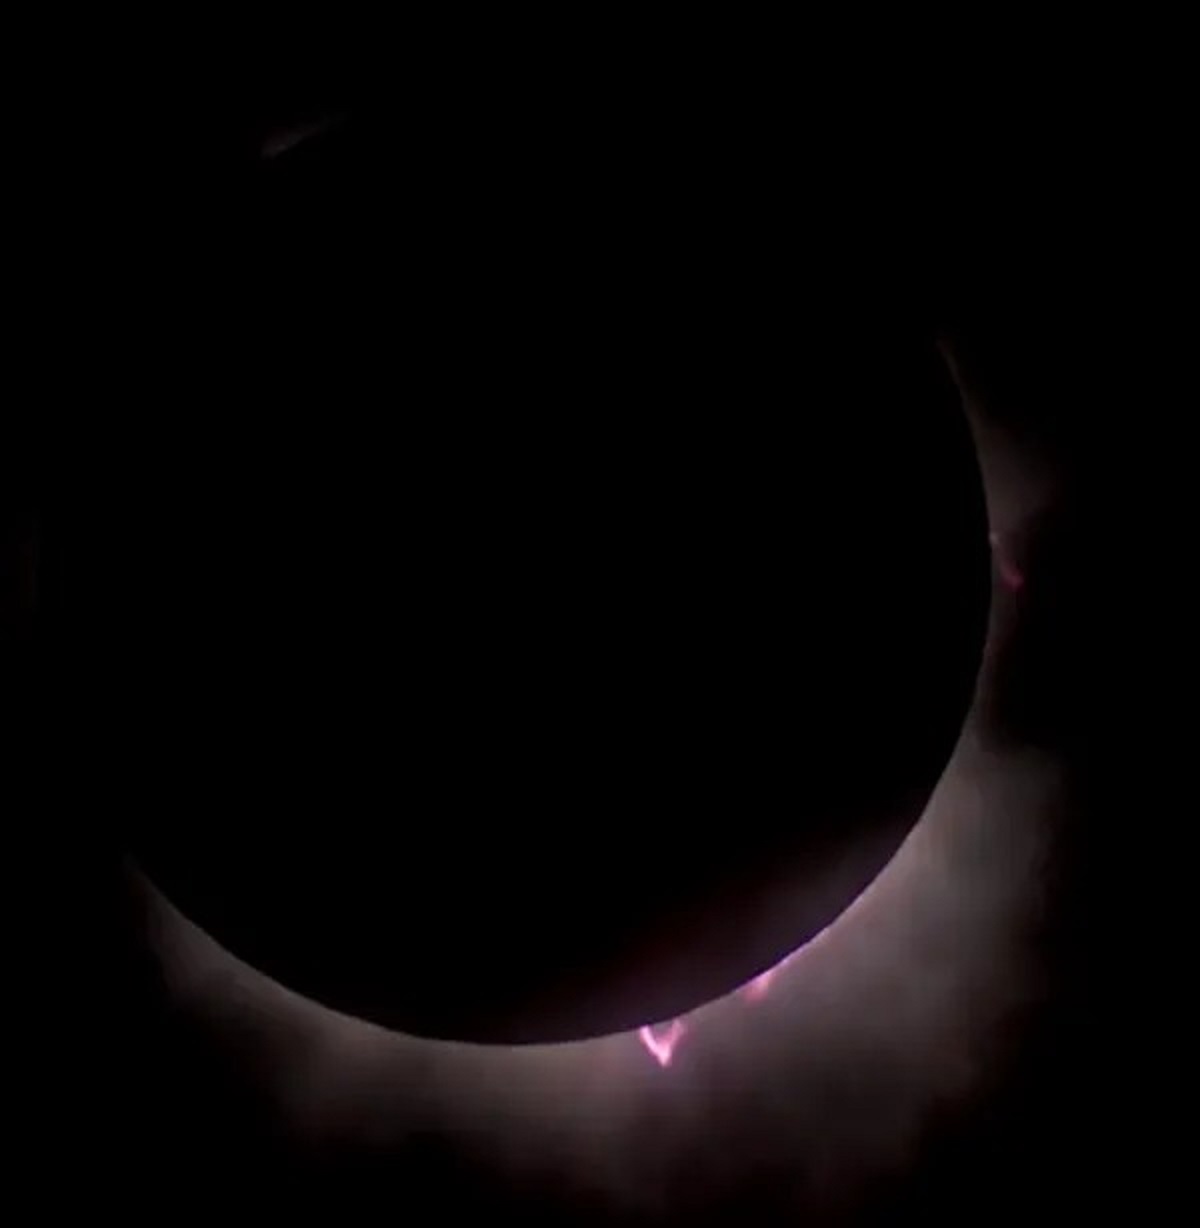 During totality a massive solar prominence became visible to the naked eye.